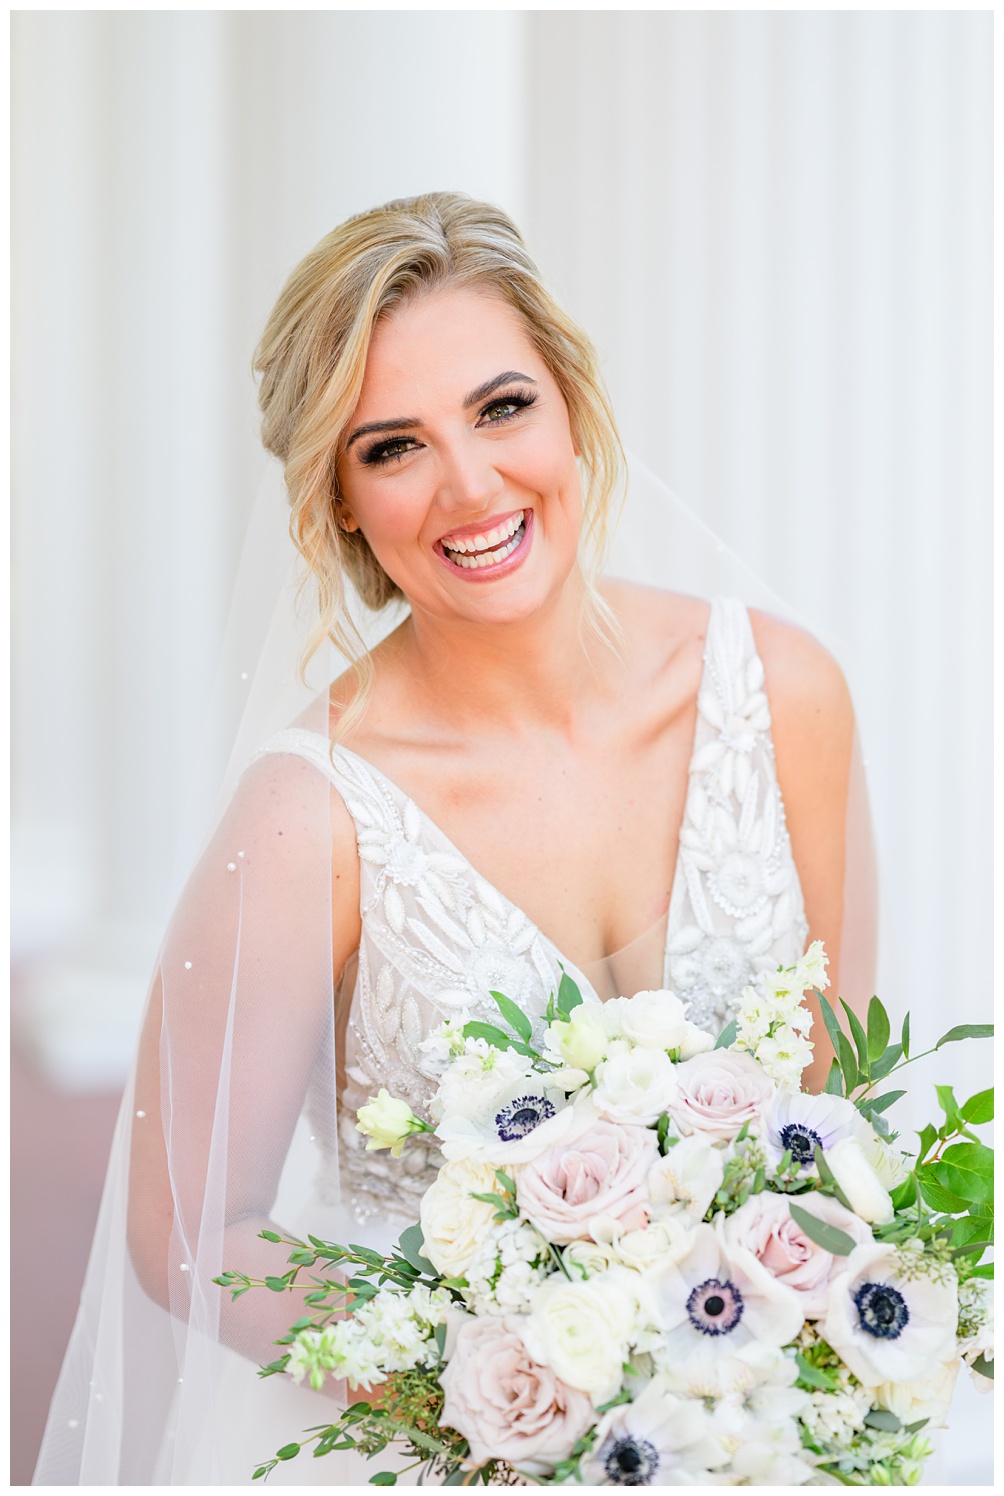 Lola Beauty hair and makeup services for Austin Brides